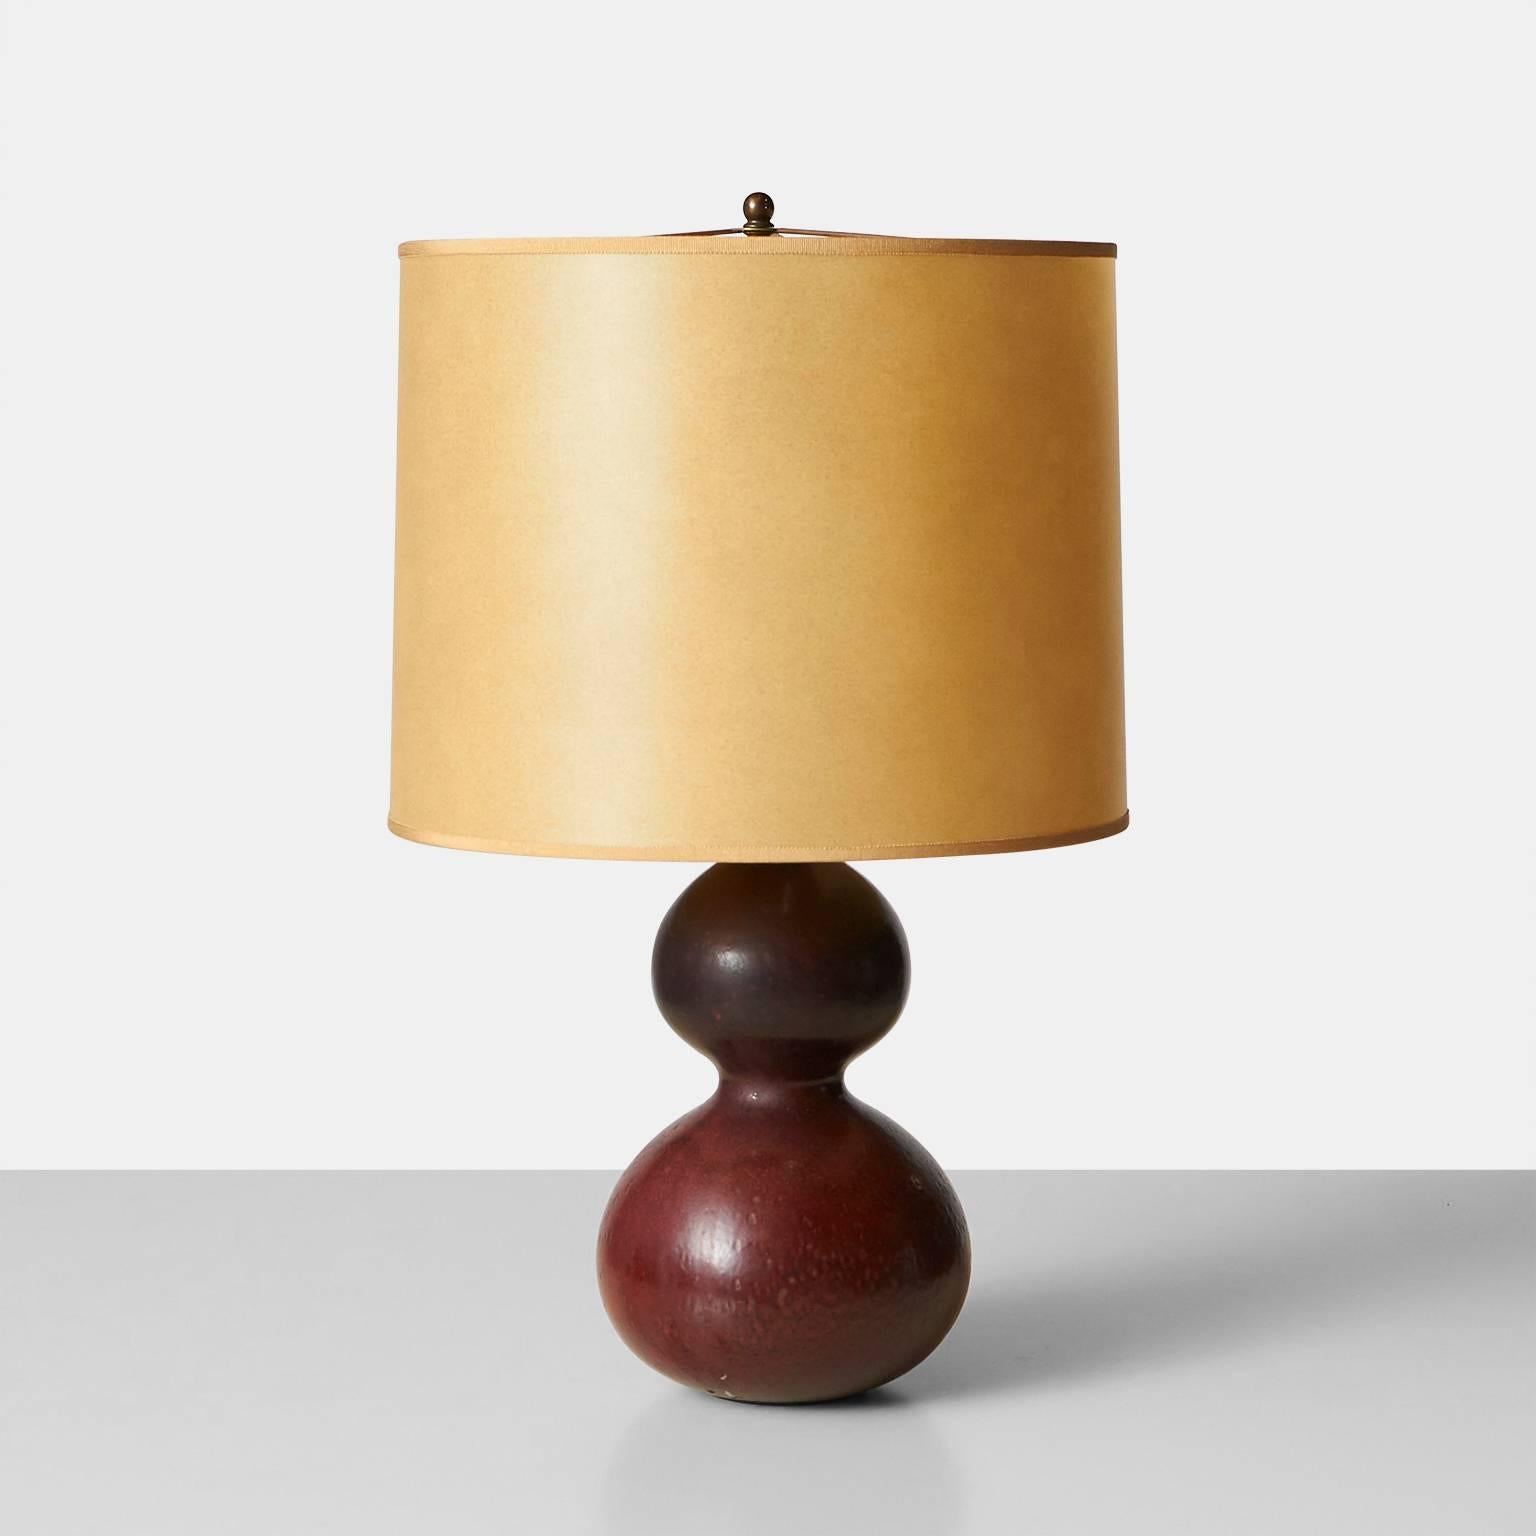 A double gourd shaped table lamp with a glaze in shades of brick and rose. Made by Axel Salto in the Royal Copenhagen studio. Signature etched on the bottom, Denmark, circa 1950.

 